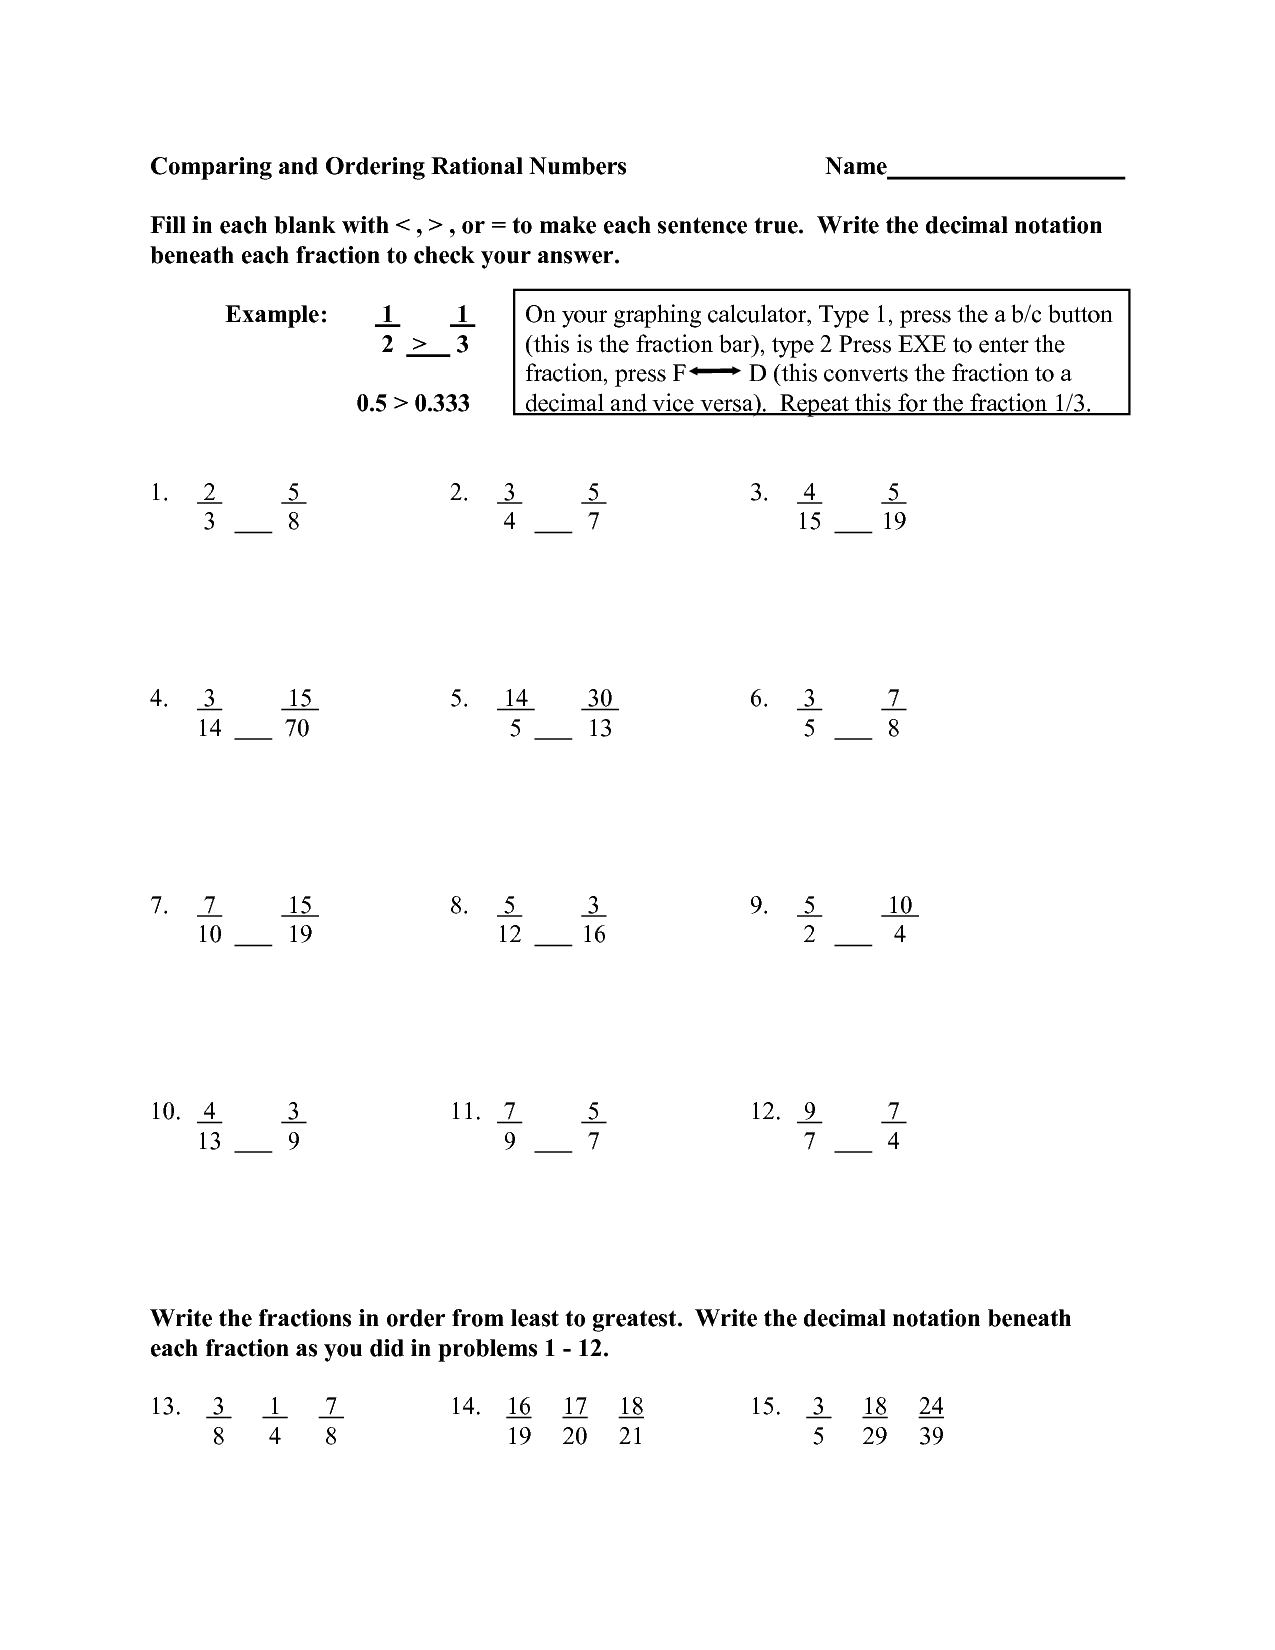 13-best-images-of-comparing-equations-worksheets-comparing-decimals-worksheet-4th-grade-6th